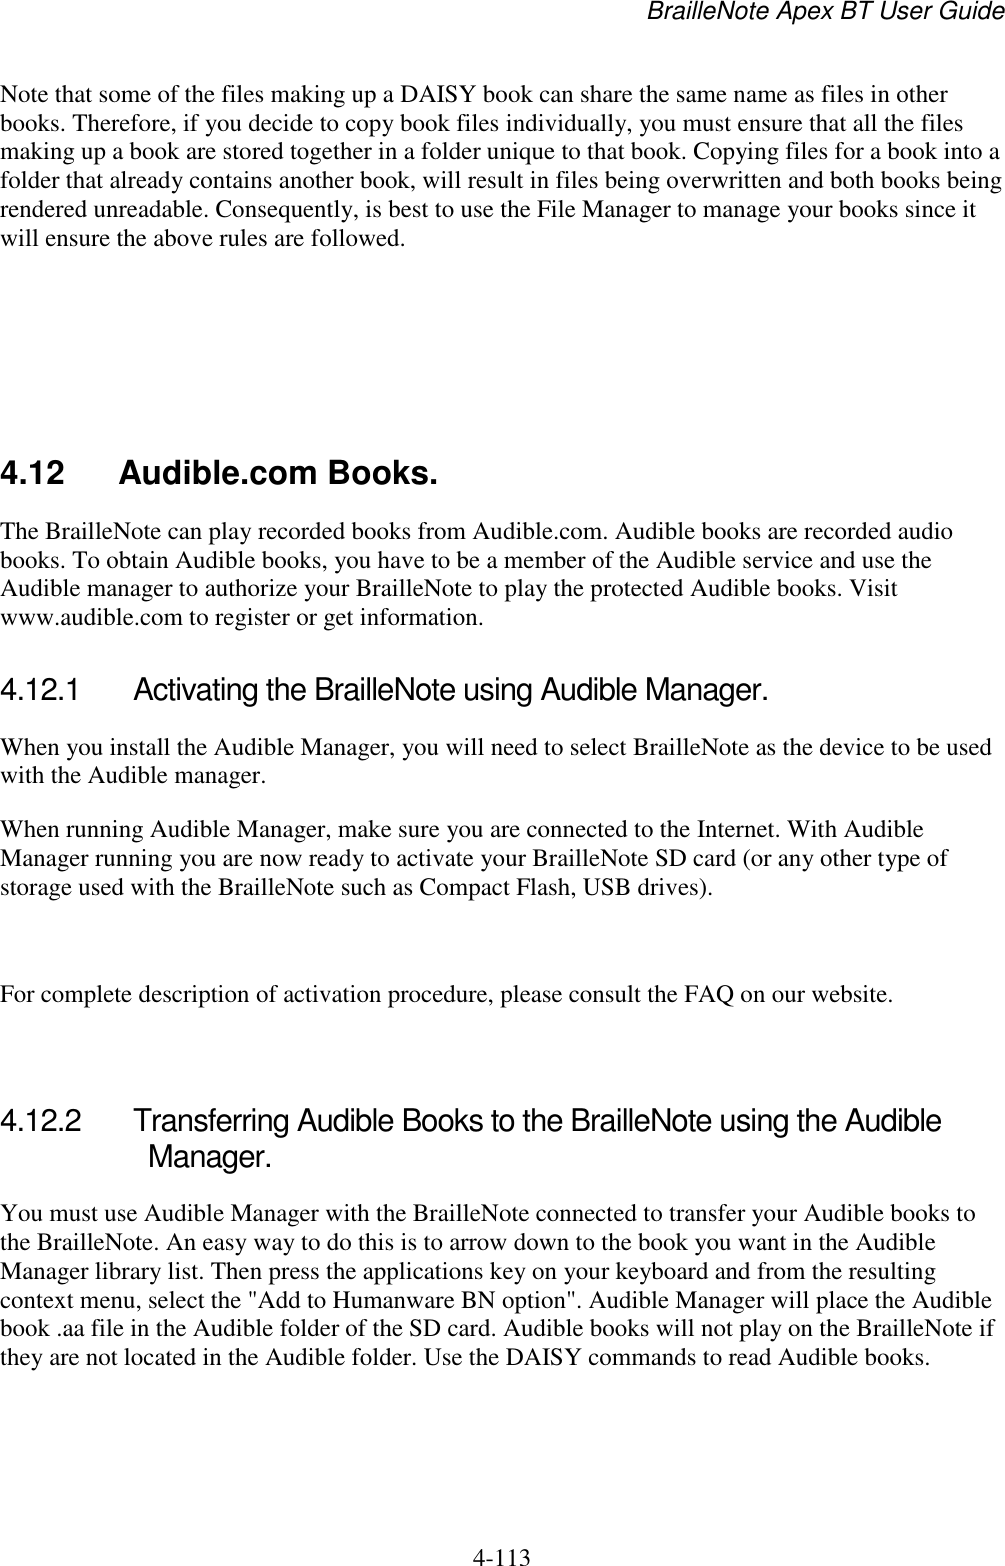 BrailleNote Apex BT User Guide   4-113   Note that some of the files making up a DAISY book can share the same name as files in other books. Therefore, if you decide to copy book files individually, you must ensure that all the files making up a book are stored together in a folder unique to that book. Copying files for a book into a folder that already contains another book, will result in files being overwritten and both books being rendered unreadable. Consequently, is best to use the File Manager to manage your books since it will ensure the above rules are followed.     4.12  Audible.com Books. The BrailleNote can play recorded books from Audible.com. Audible books are recorded audio books. To obtain Audible books, you have to be a member of the Audible service and use the Audible manager to authorize your BrailleNote to play the protected Audible books. Visit www.audible.com to register or get information.   4.12.1  Activating the BrailleNote using Audible Manager. When you install the Audible Manager, you will need to select BrailleNote as the device to be used with the Audible manager.  When running Audible Manager, make sure you are connected to the Internet. With Audible Manager running you are now ready to activate your BrailleNote SD card (or any other type of storage used with the BrailleNote such as Compact Flash, USB drives).   For complete description of activation procedure, please consult the FAQ on our website.   4.12.2  Transferring Audible Books to the BrailleNote using the Audible Manager. You must use Audible Manager with the BrailleNote connected to transfer your Audible books to the BrailleNote. An easy way to do this is to arrow down to the book you want in the Audible Manager library list. Then press the applications key on your keyboard and from the resulting context menu, select the &quot;Add to Humanware BN option&quot;. Audible Manager will place the Audible book .aa file in the Audible folder of the SD card. Audible books will not play on the BrailleNote if they are not located in the Audible folder. Use the DAISY commands to read Audible books.   